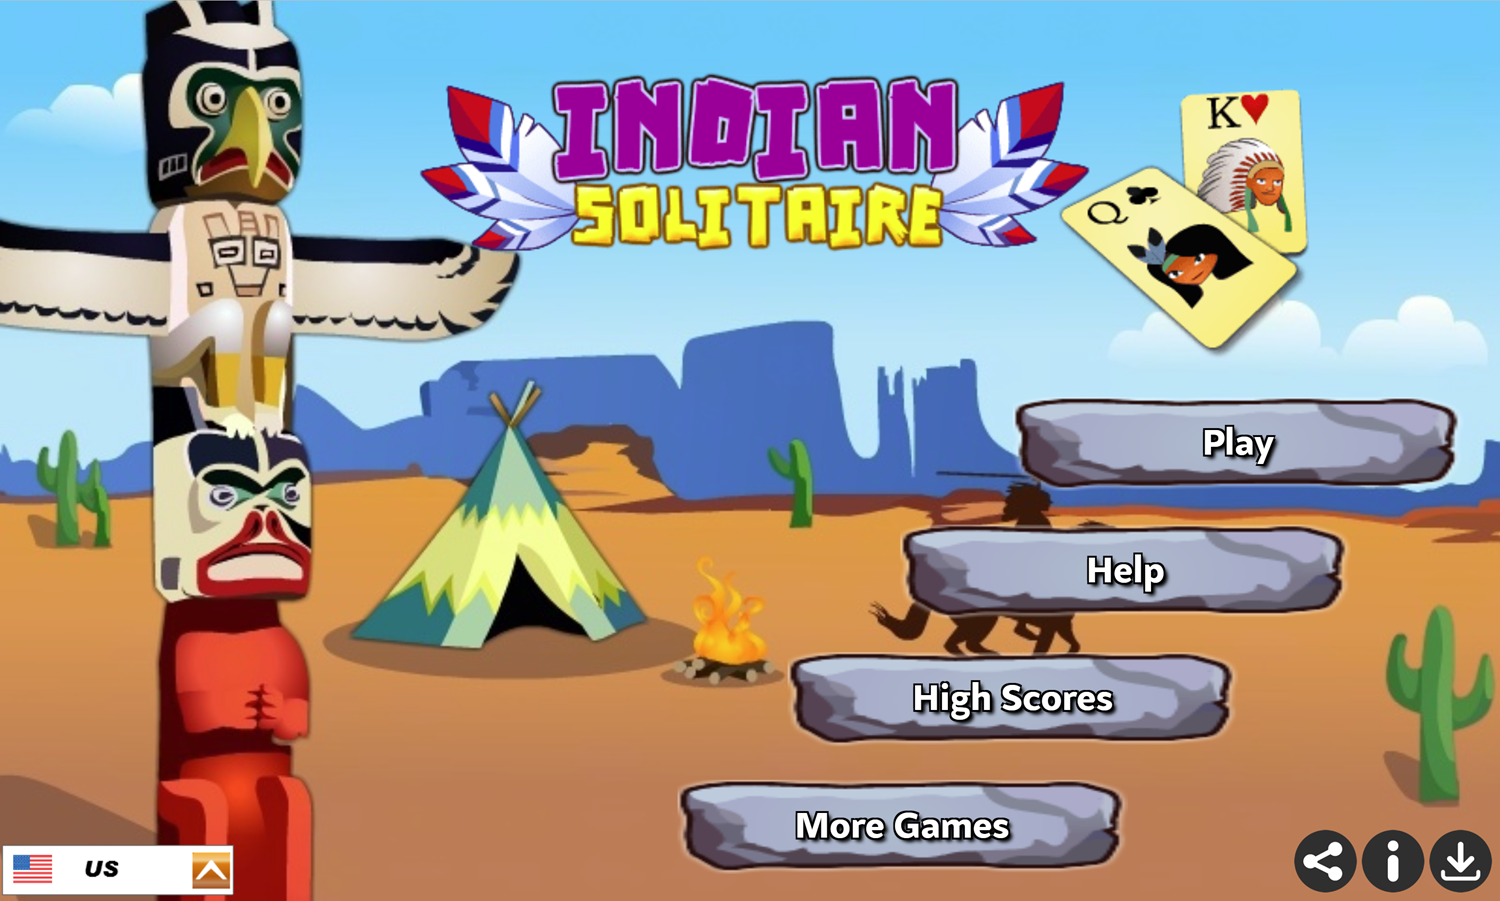 Indian Solitaire Game Welcome Screen Screenshot.